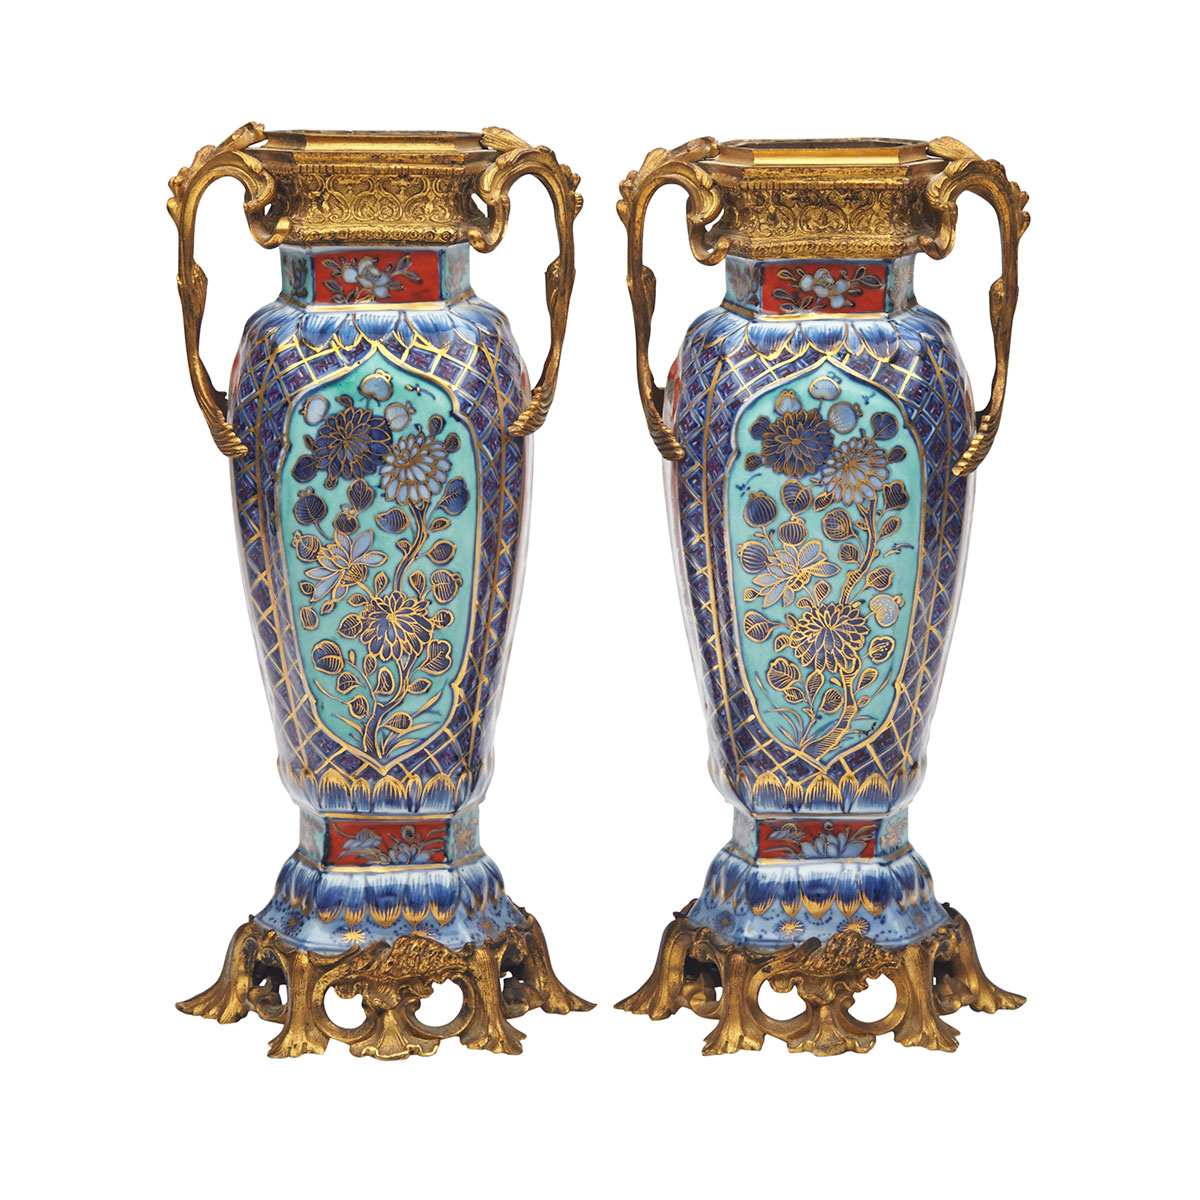 Pair of French Ormolu Mounted ‘Clobbered’ Export Vases, Kangxi Period (1662-1722)